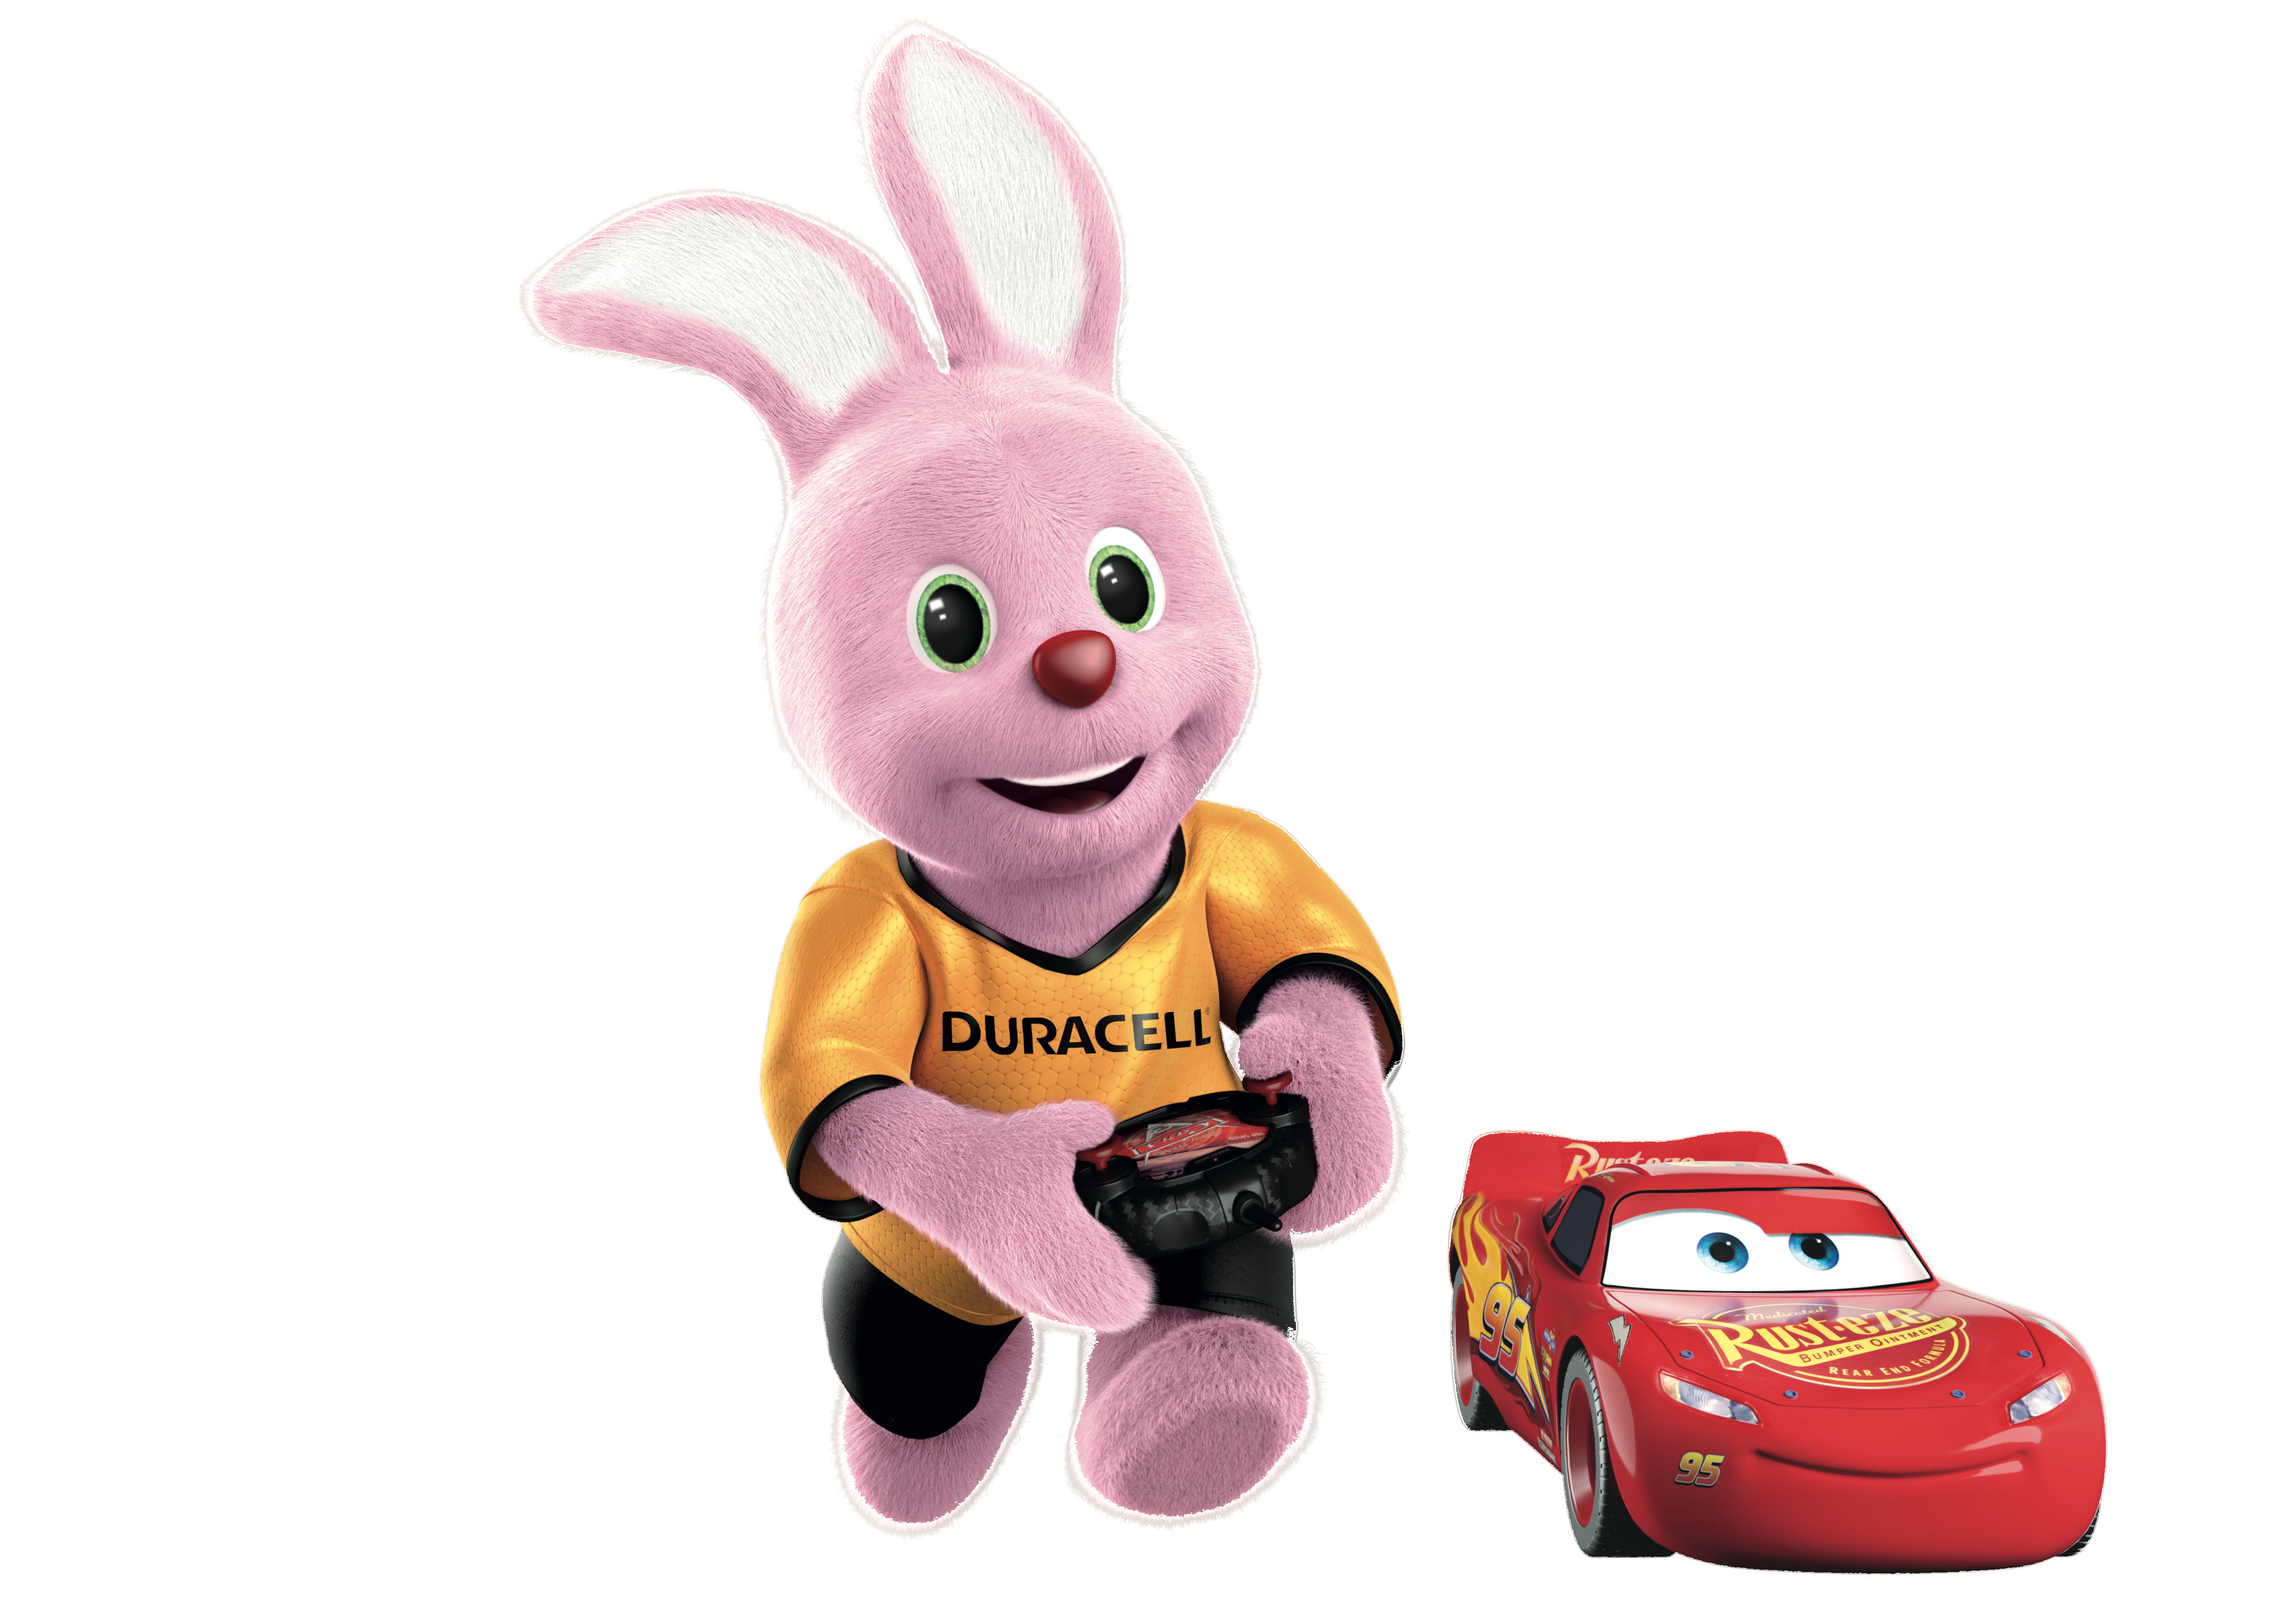 DURACELL_pose_0131_Bunny_running_with_Dickie_remote.psd_JPG_High-Res_300...